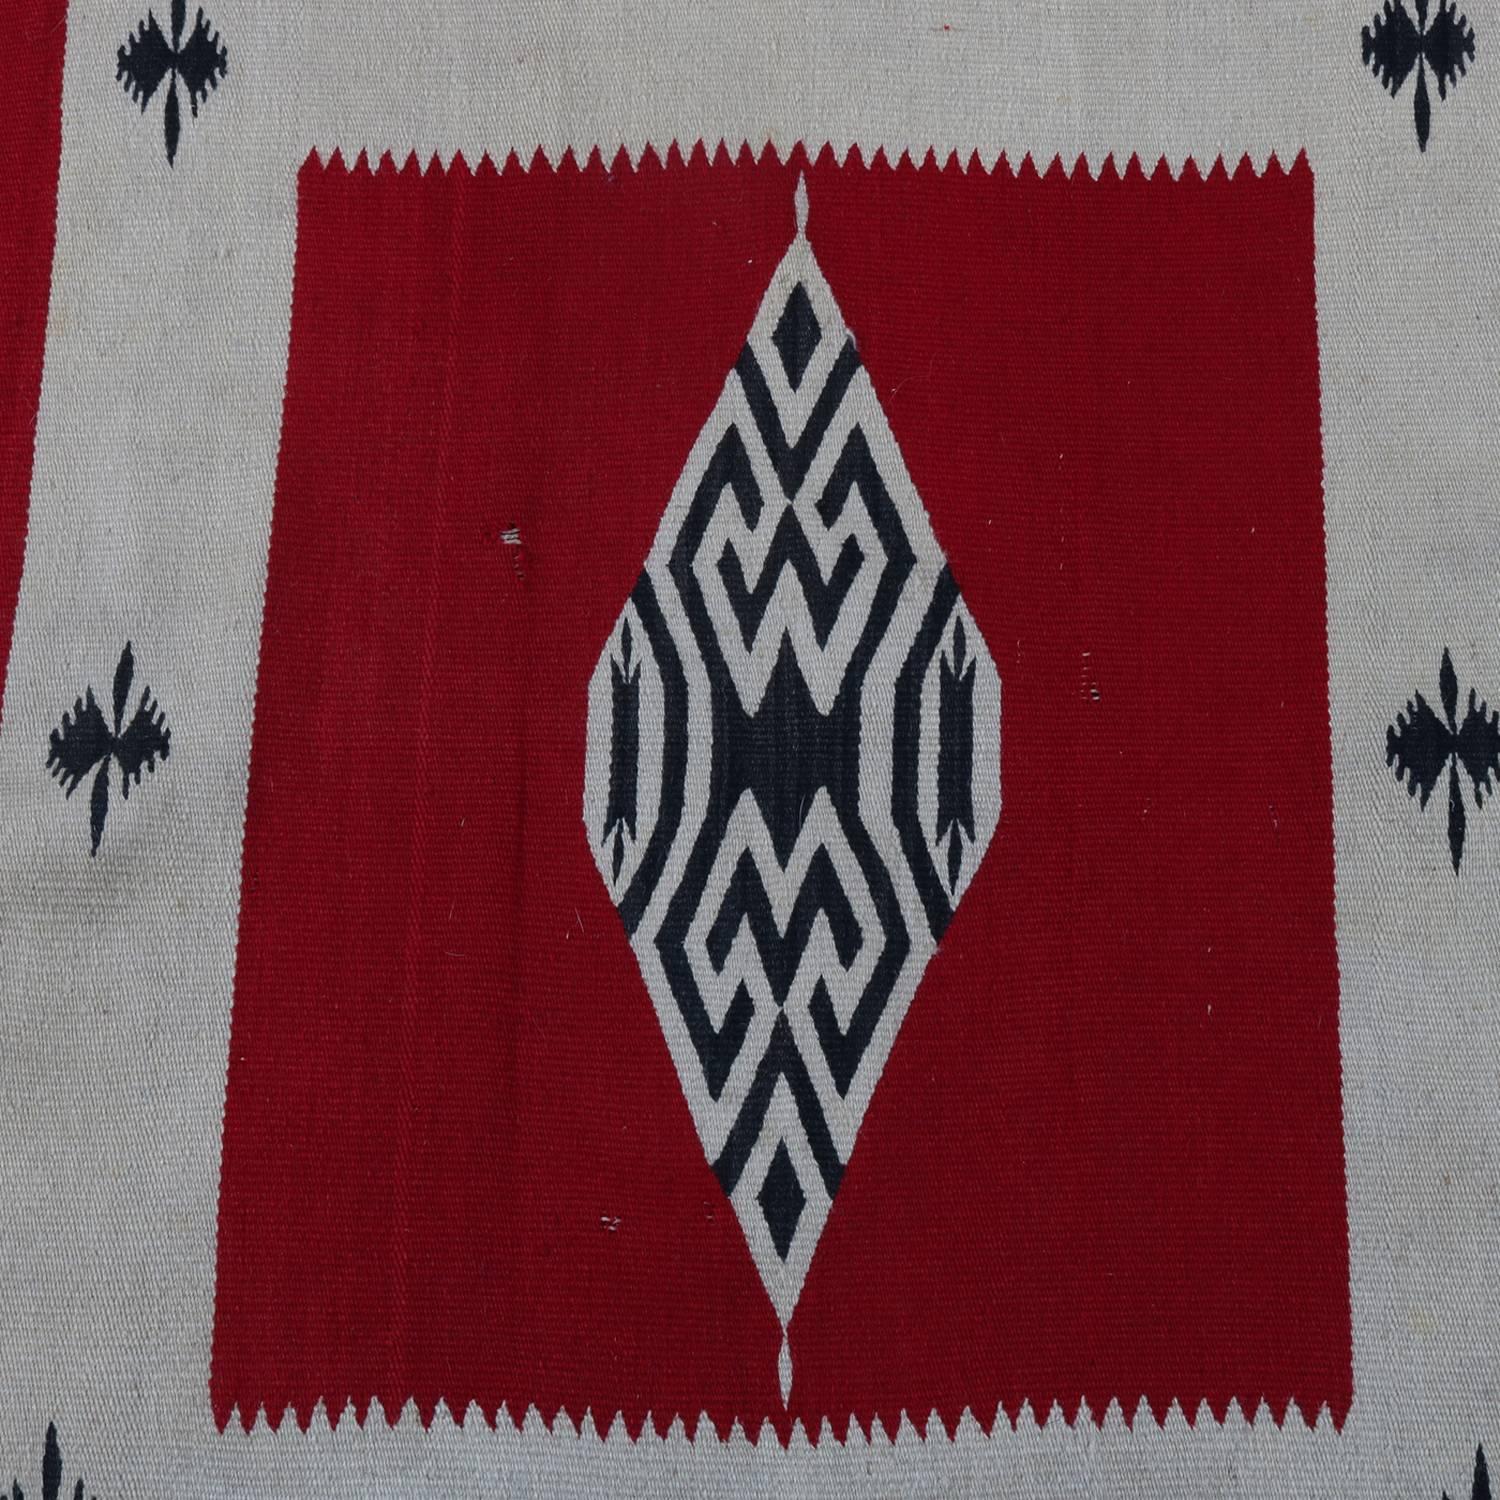 Antique Southwestern American Indian Serape style Navajo mat features wool construction with central diamond with flanking stripes, dominant colors include red, black and ivory white, circa 1920

***DELIVERY NOTICE – Due to COVID-19 we are employing